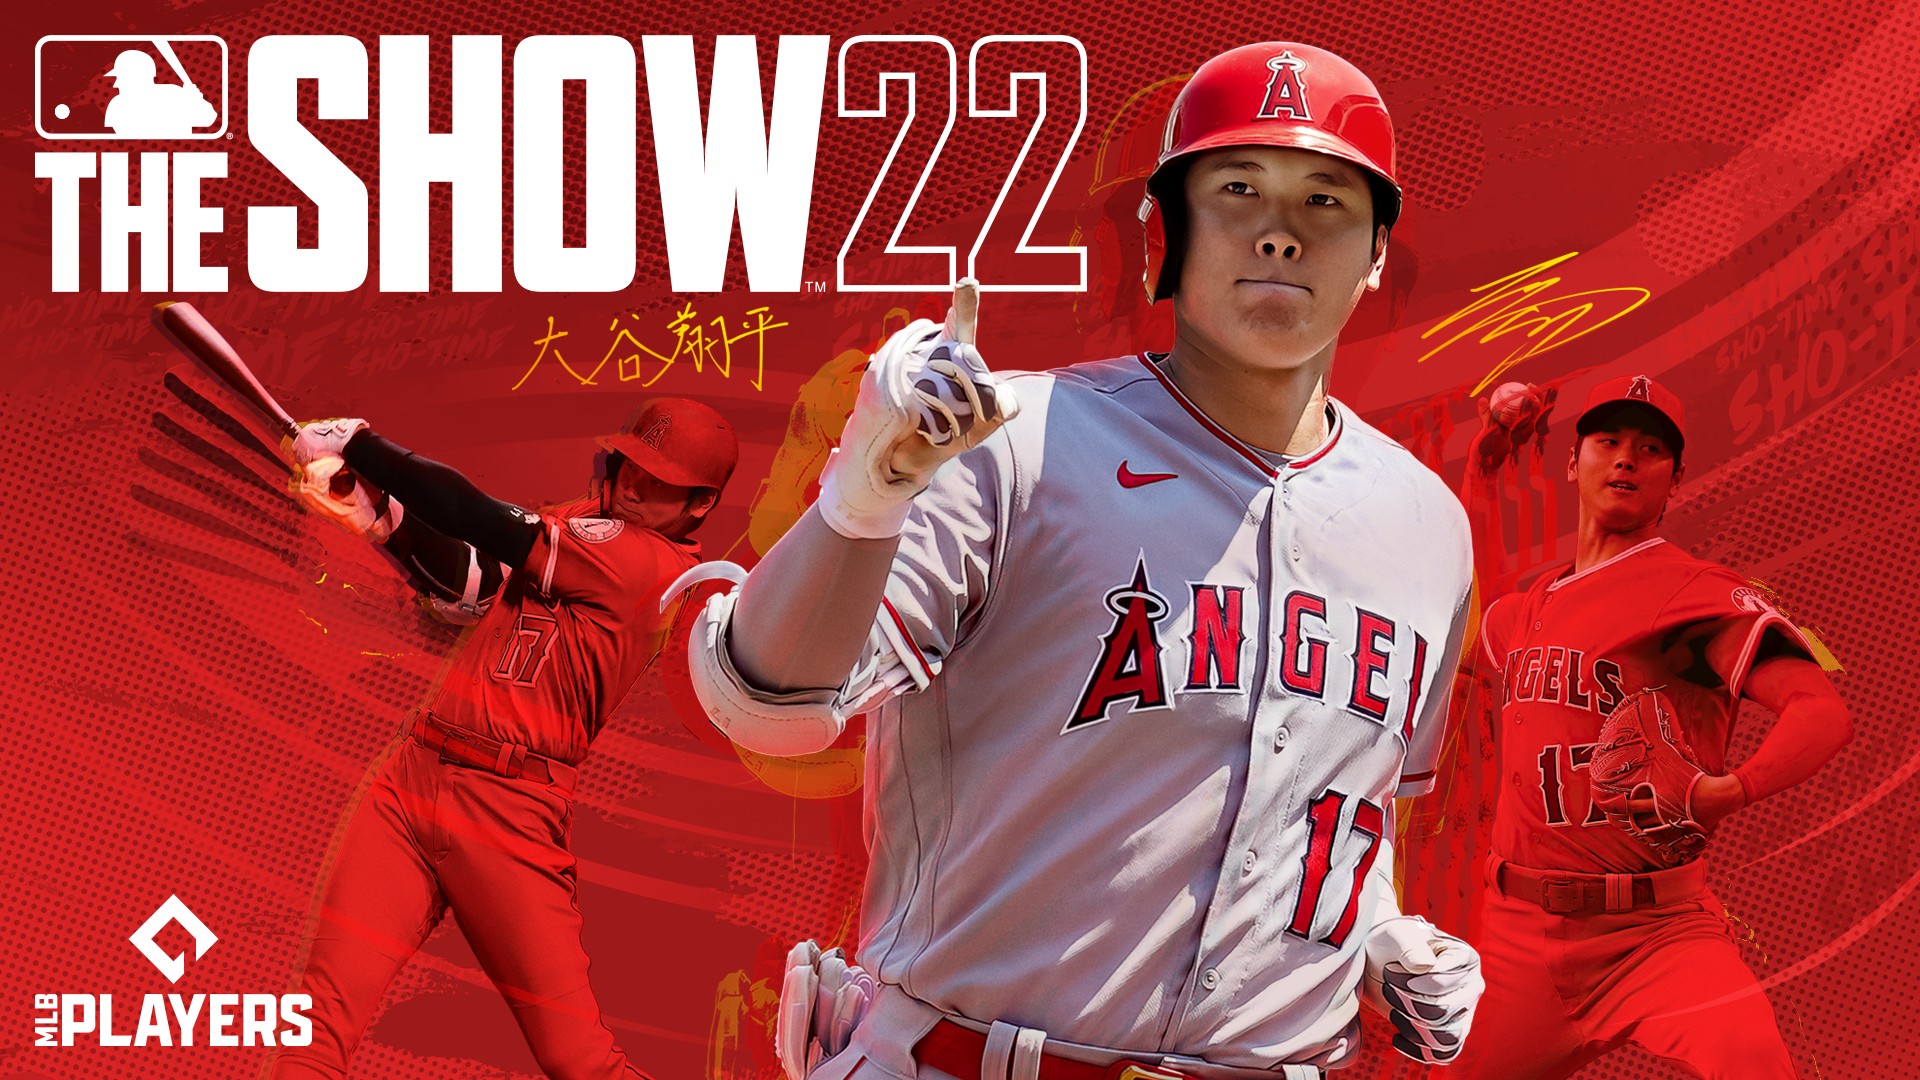 Video For Shohei Ohtani: Unanimous AL MVP is Your MLB The Show 22 Cover Athlete